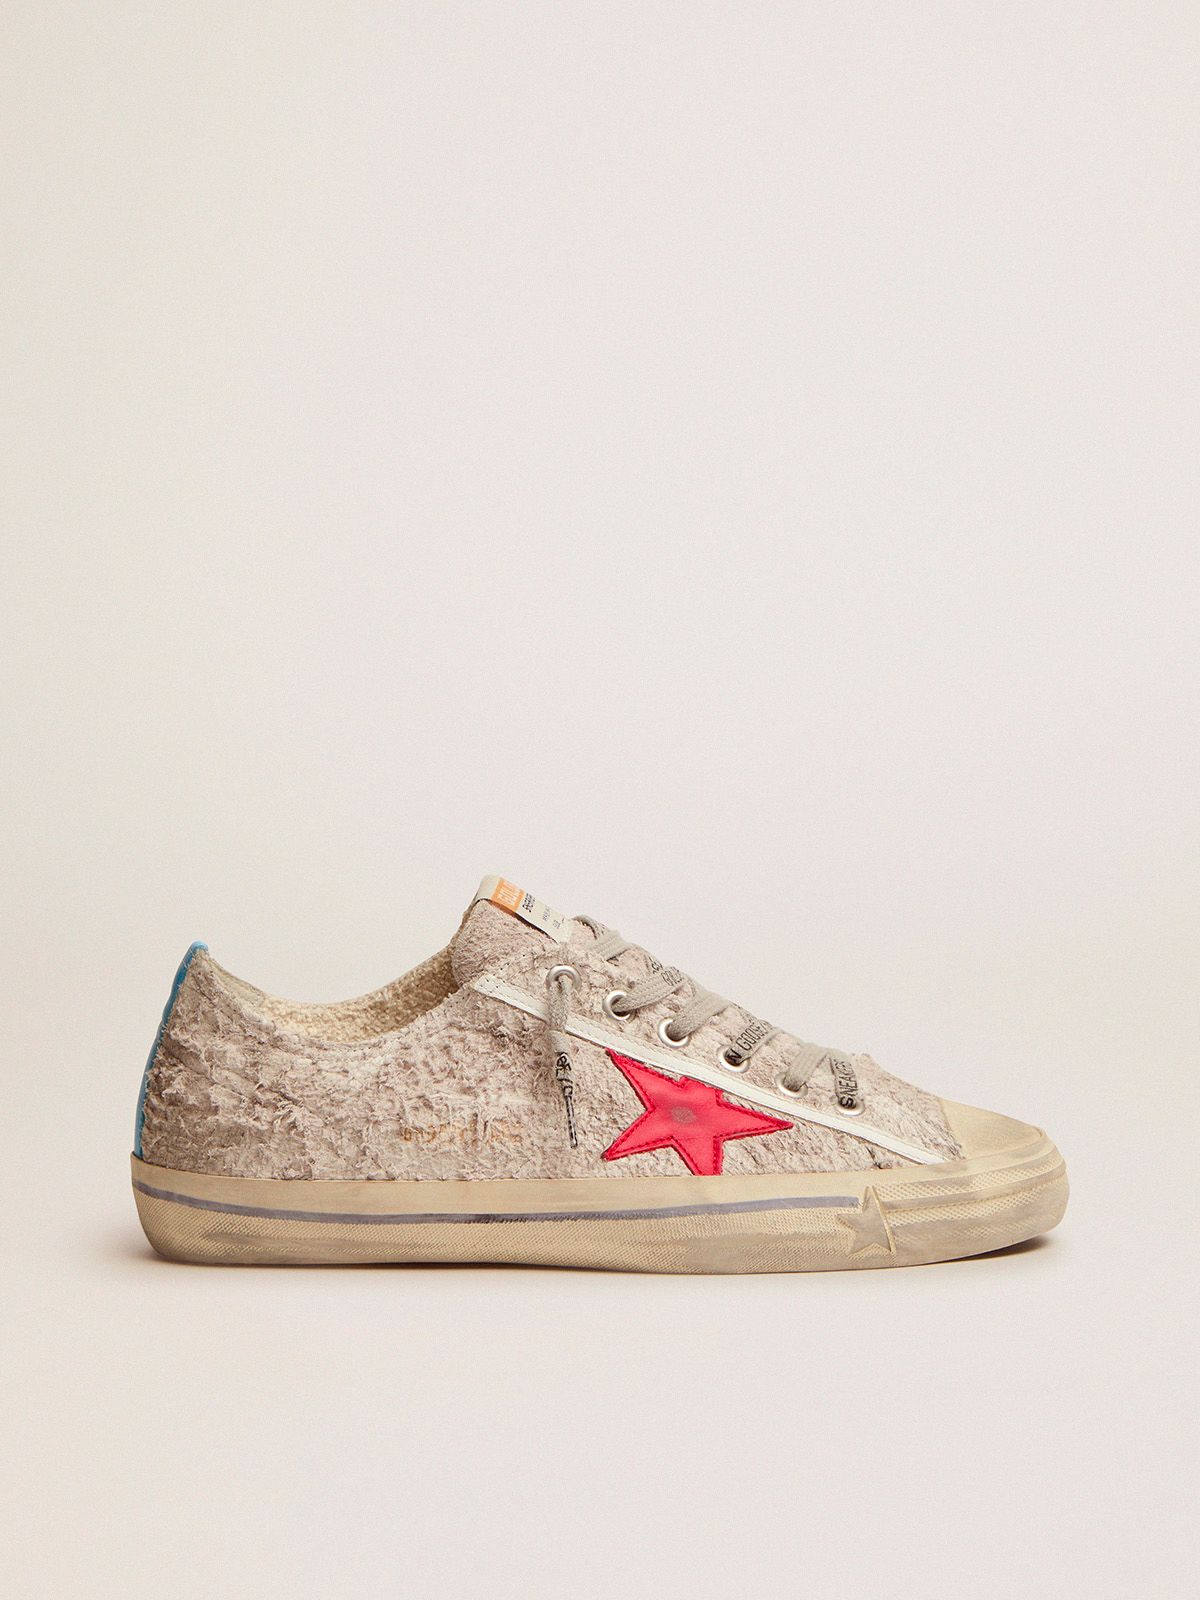 golden goose sneakers in V-Star red suede leather white with star